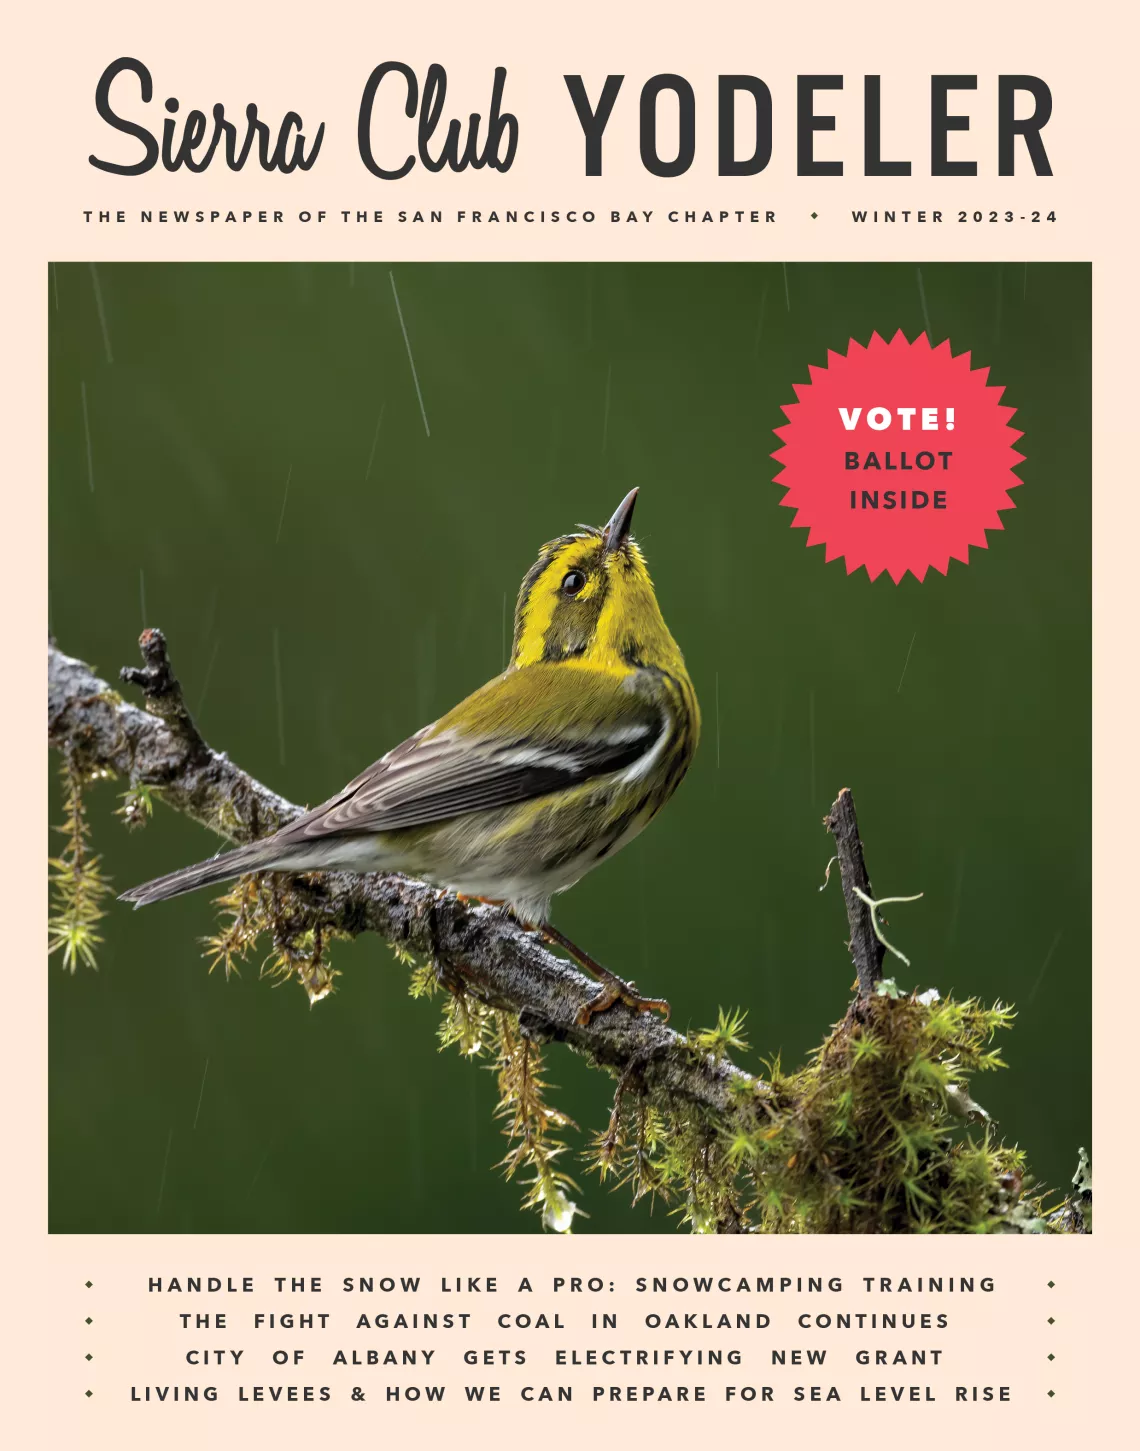 Winter 2023-24 Yodeler cover with a yellow songbird looking up into the rain while perched on a mossy branch